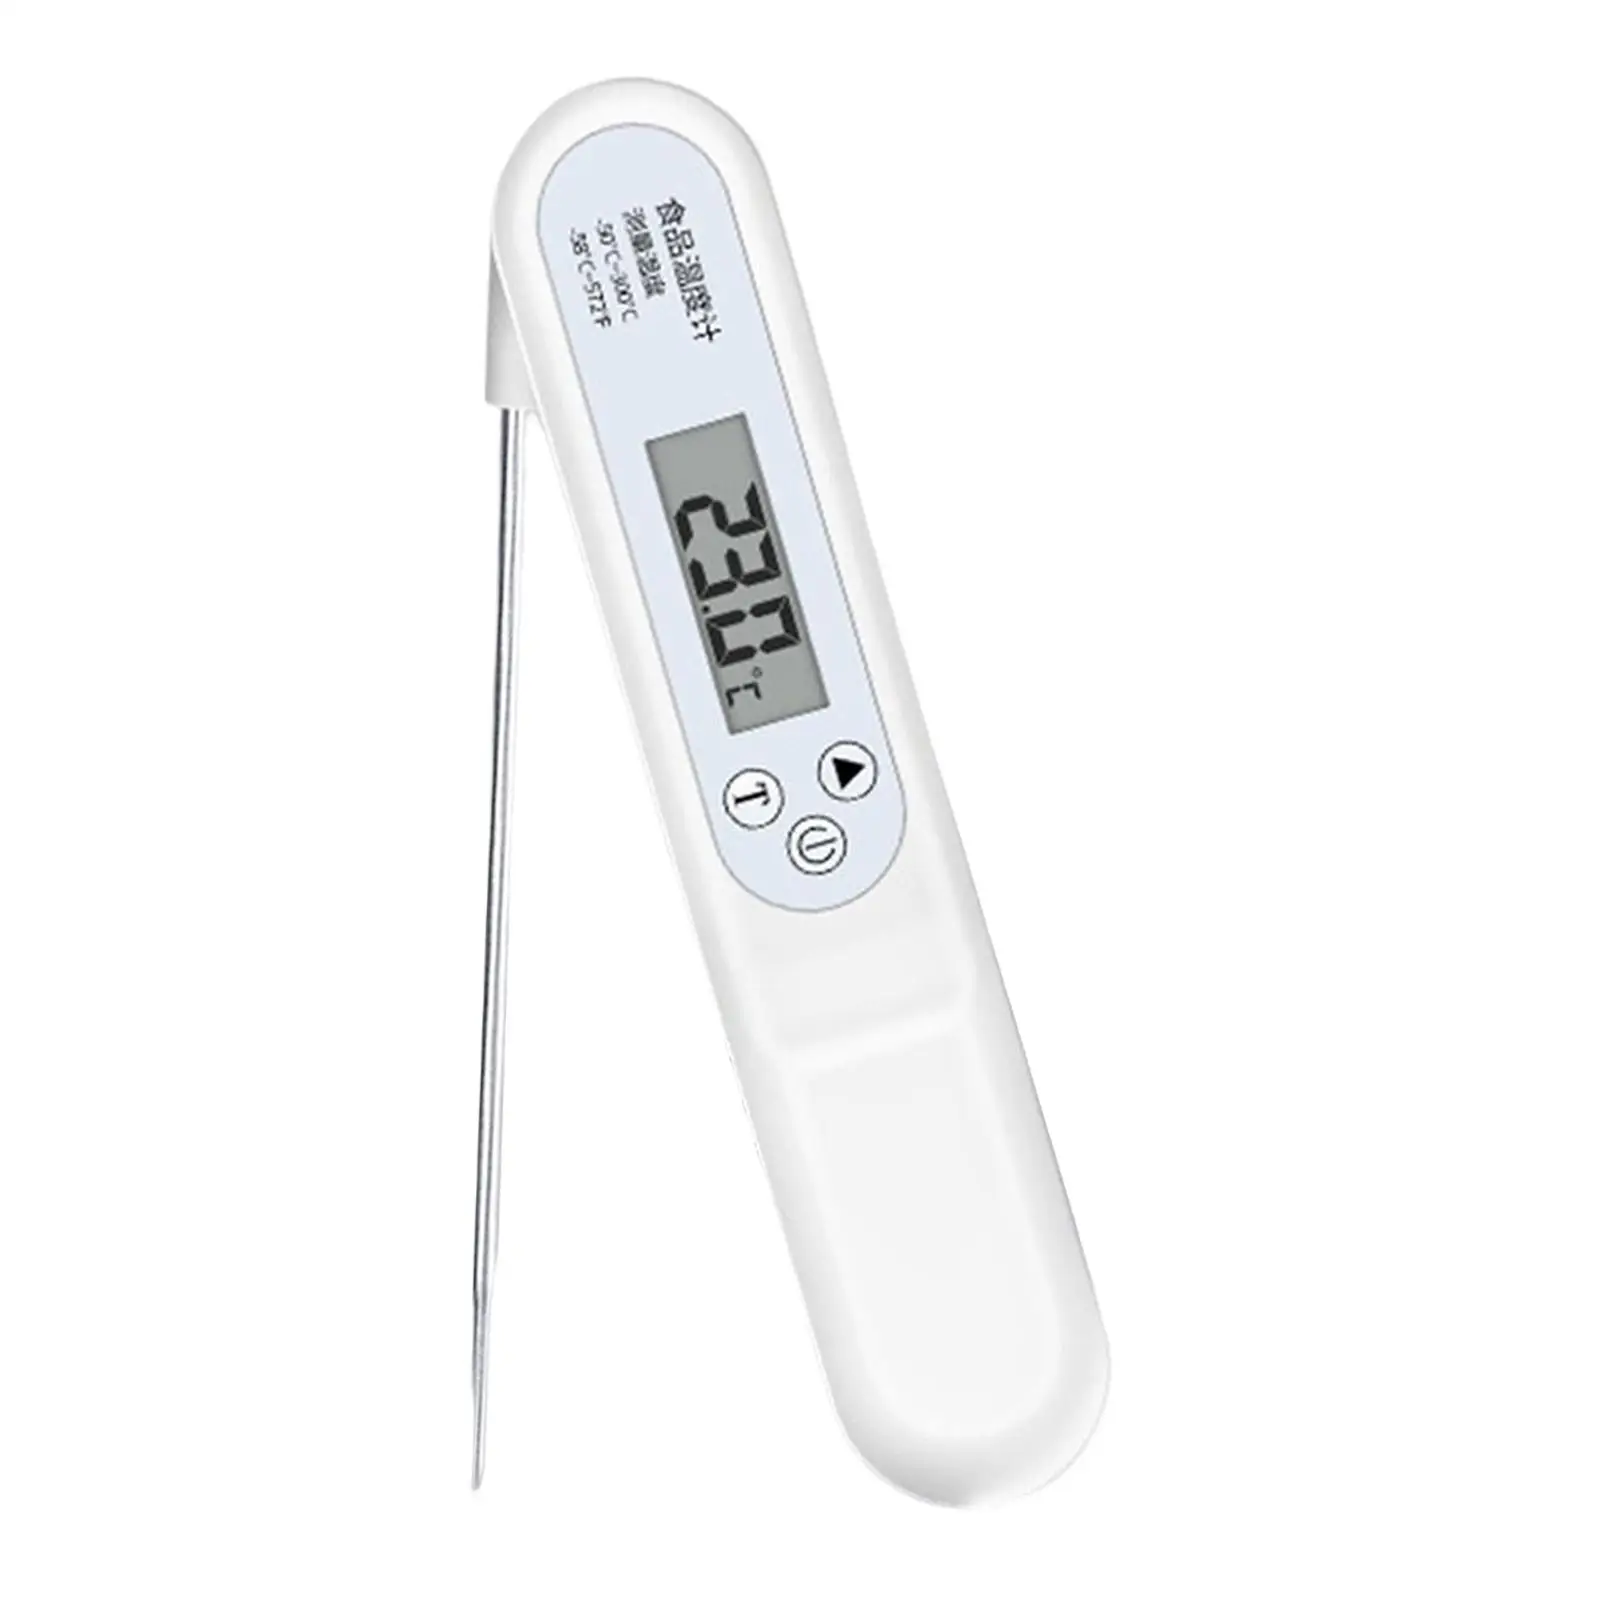 Food Thermometer LCD Display Screen Waterproof Meat Thermometer for Frying